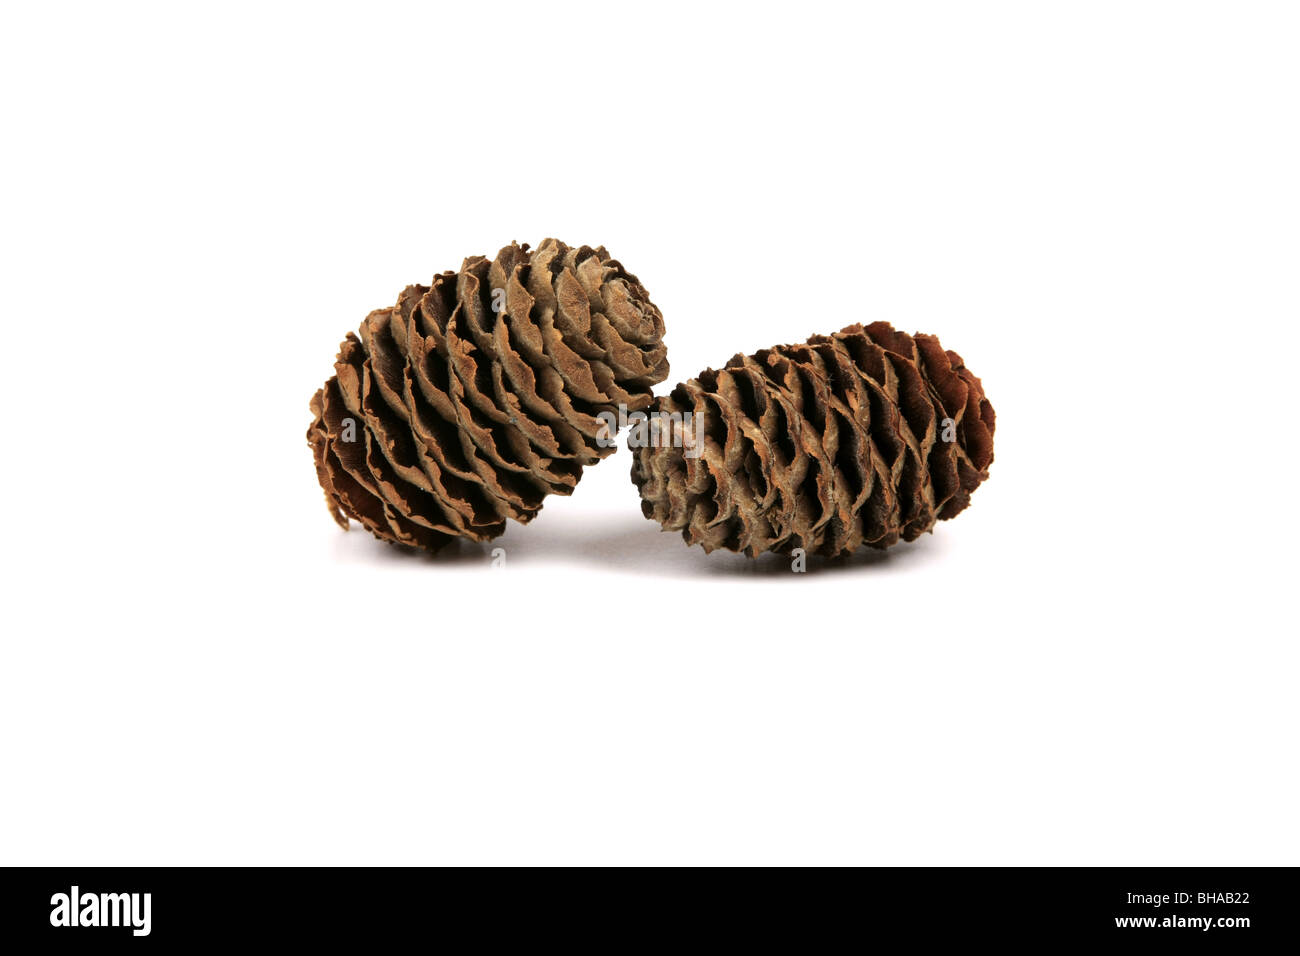 Fir Tree Cones against a white background Stock Photo